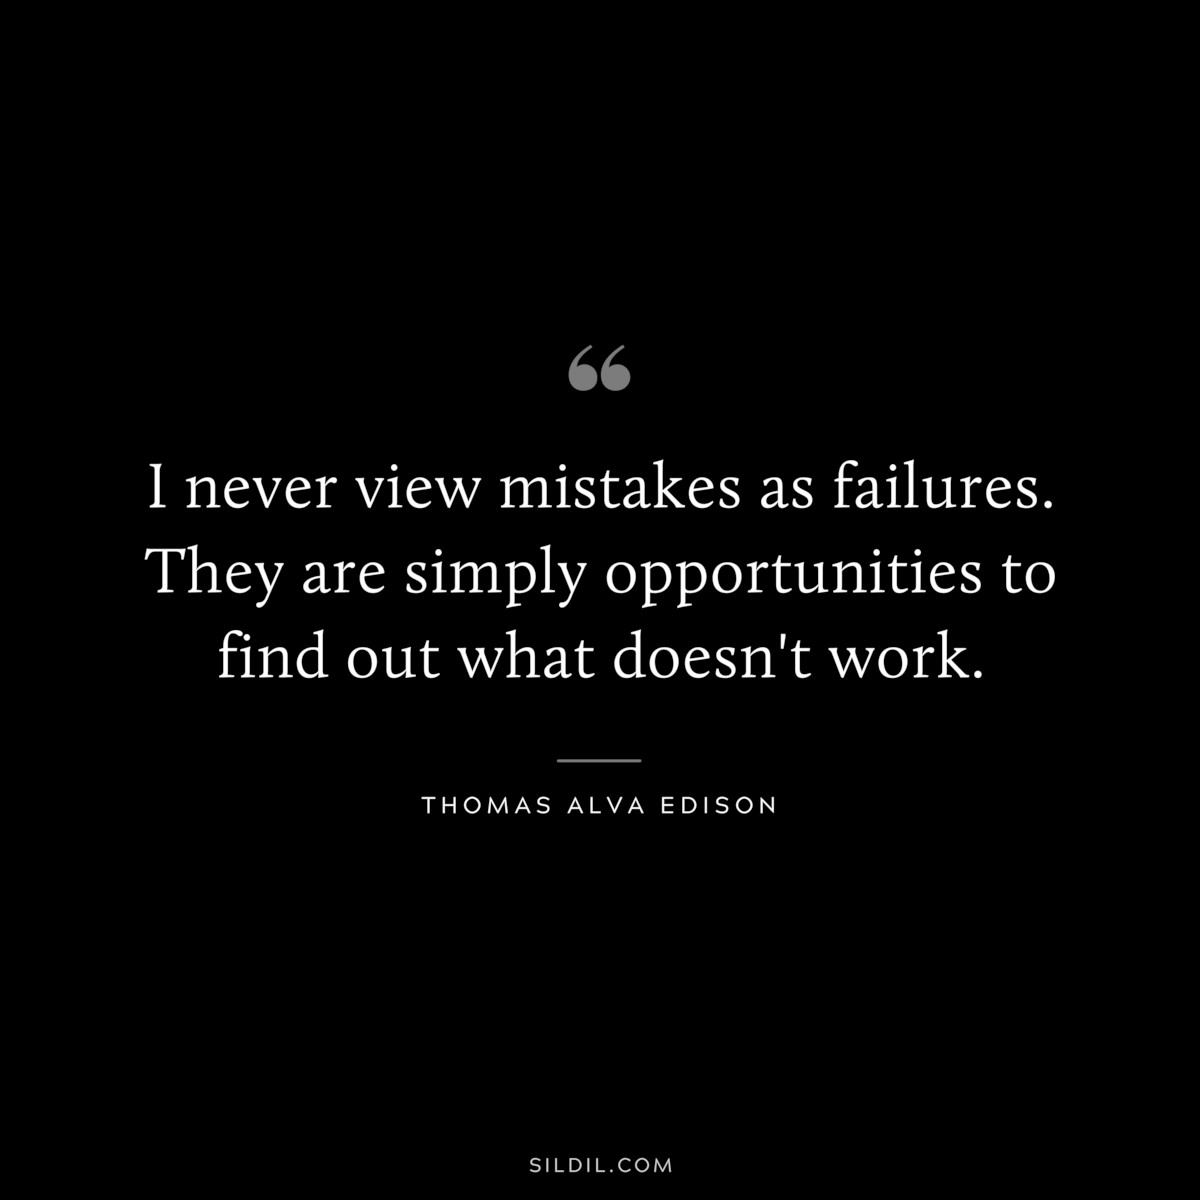 I never view mistakes as failures. They are simply opportunities to find out what doesn't work. ― Thomas Alva Edison